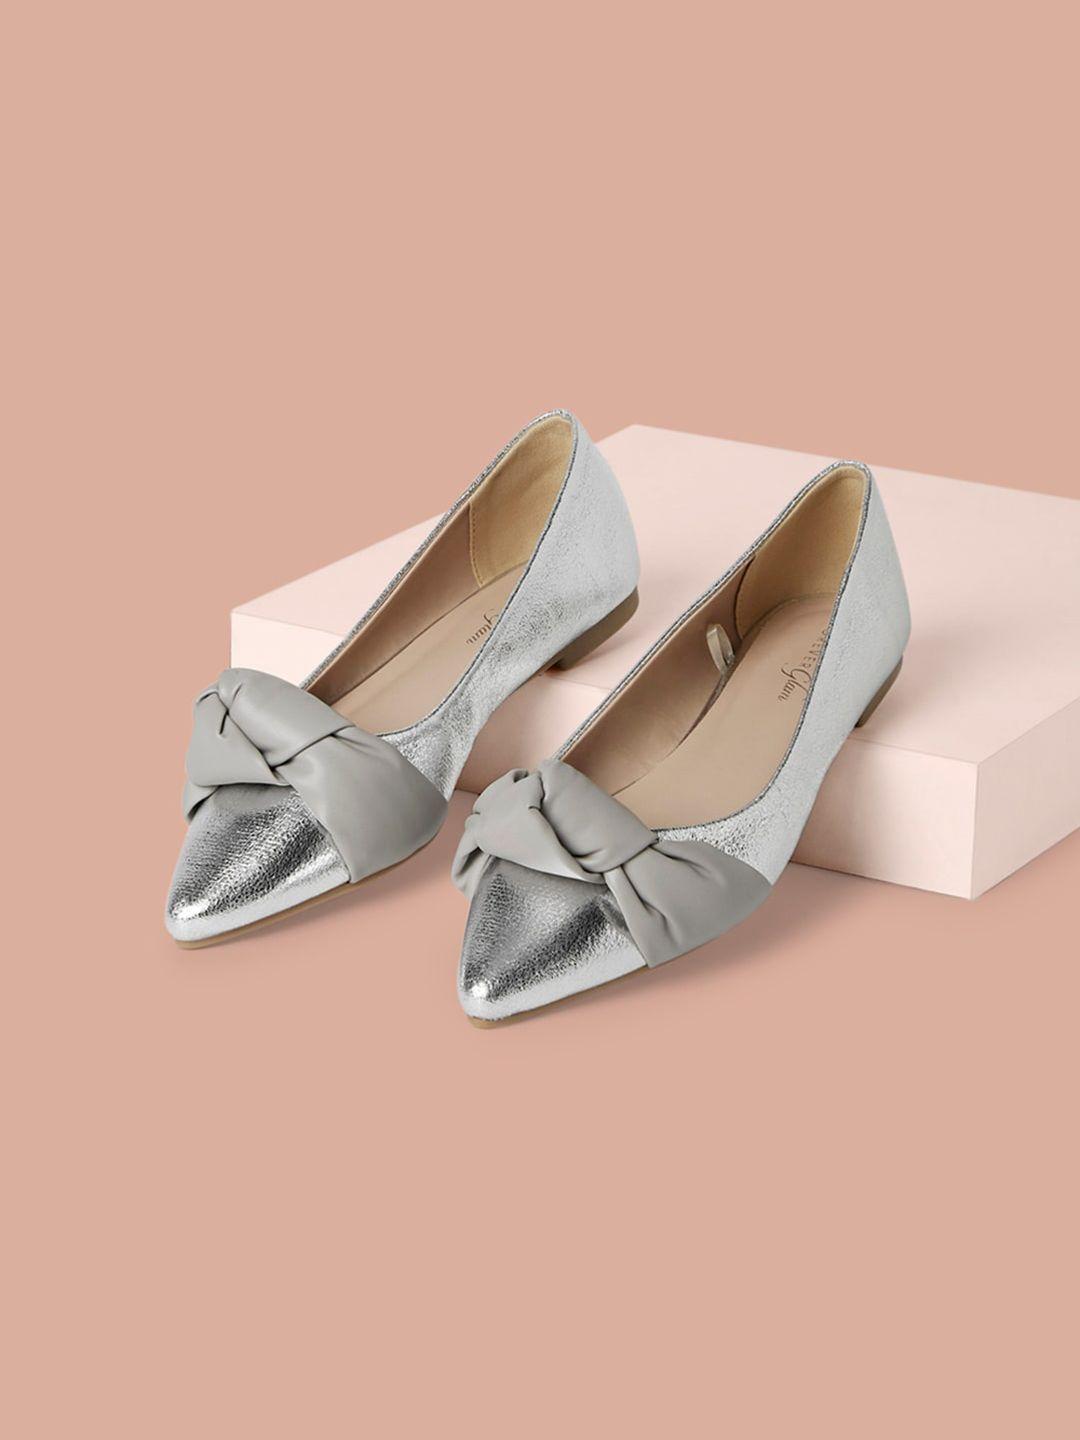 forever glam by pantaloons textured knotted pointed toe ballerinas